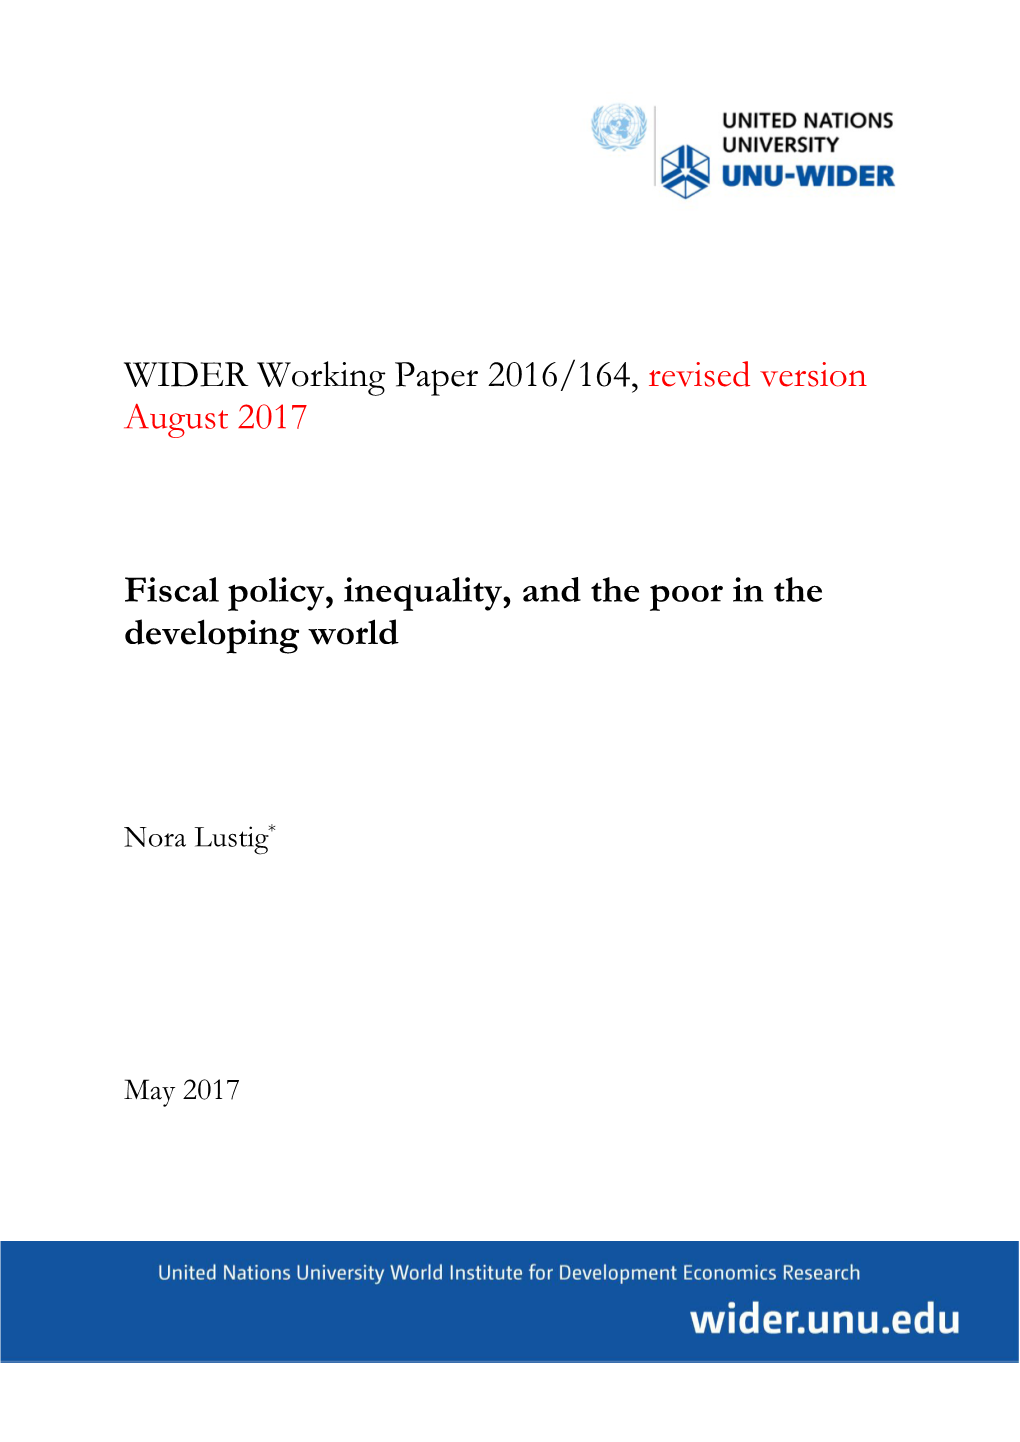 Fiscal Policy, Inequality and the Poor in the Developing World’